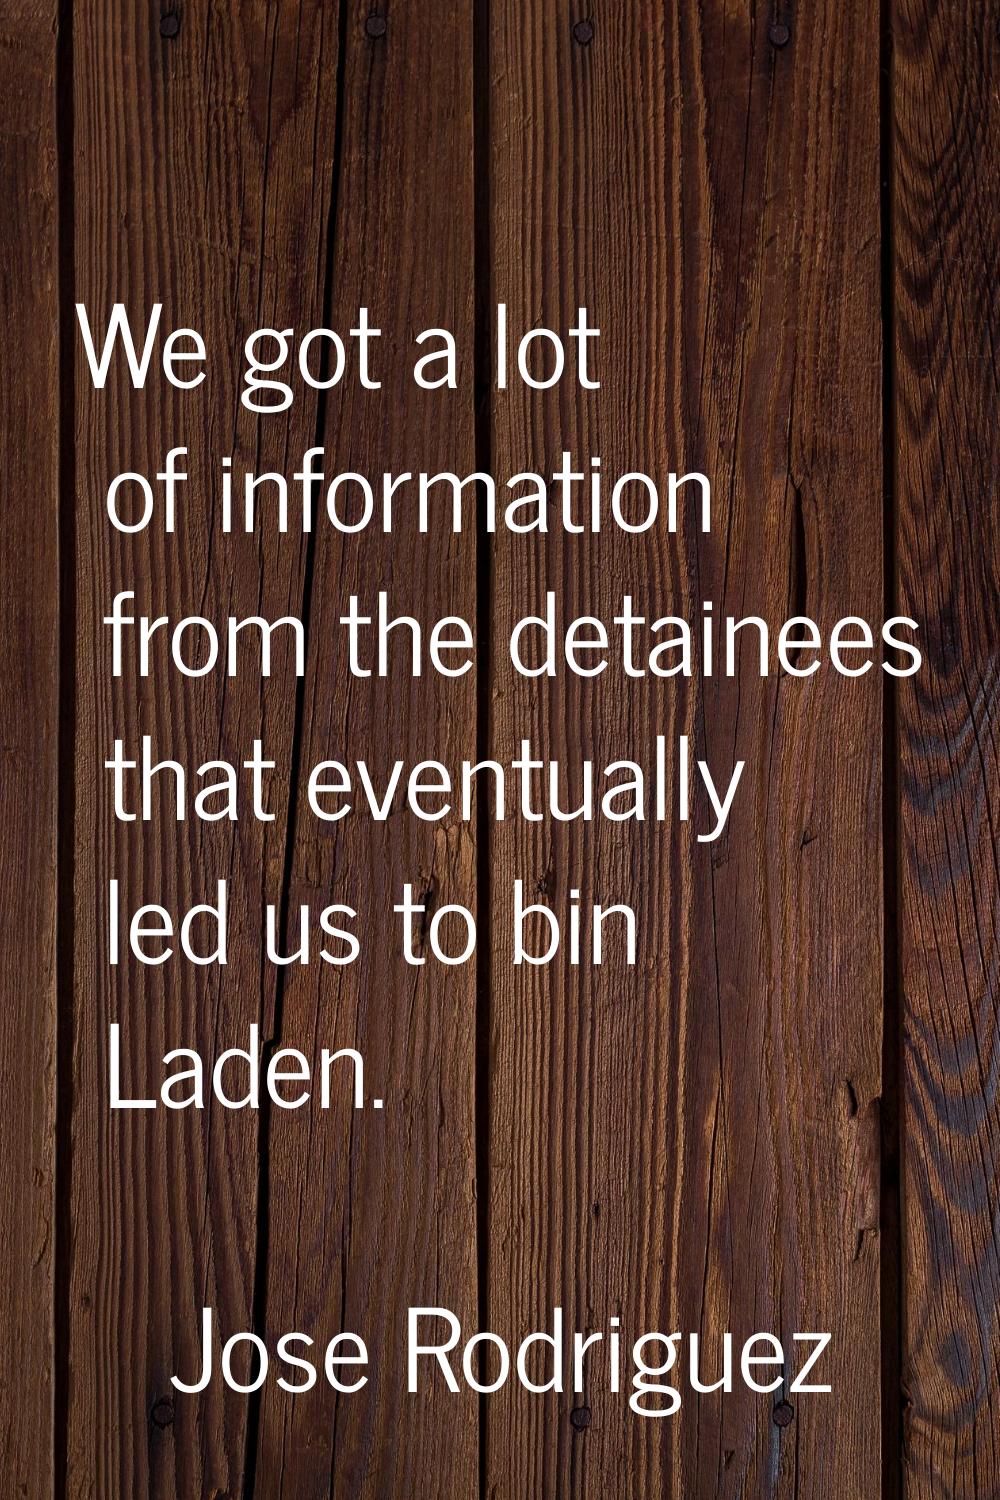 We got a lot of information from the detainees that eventually led us to bin Laden.